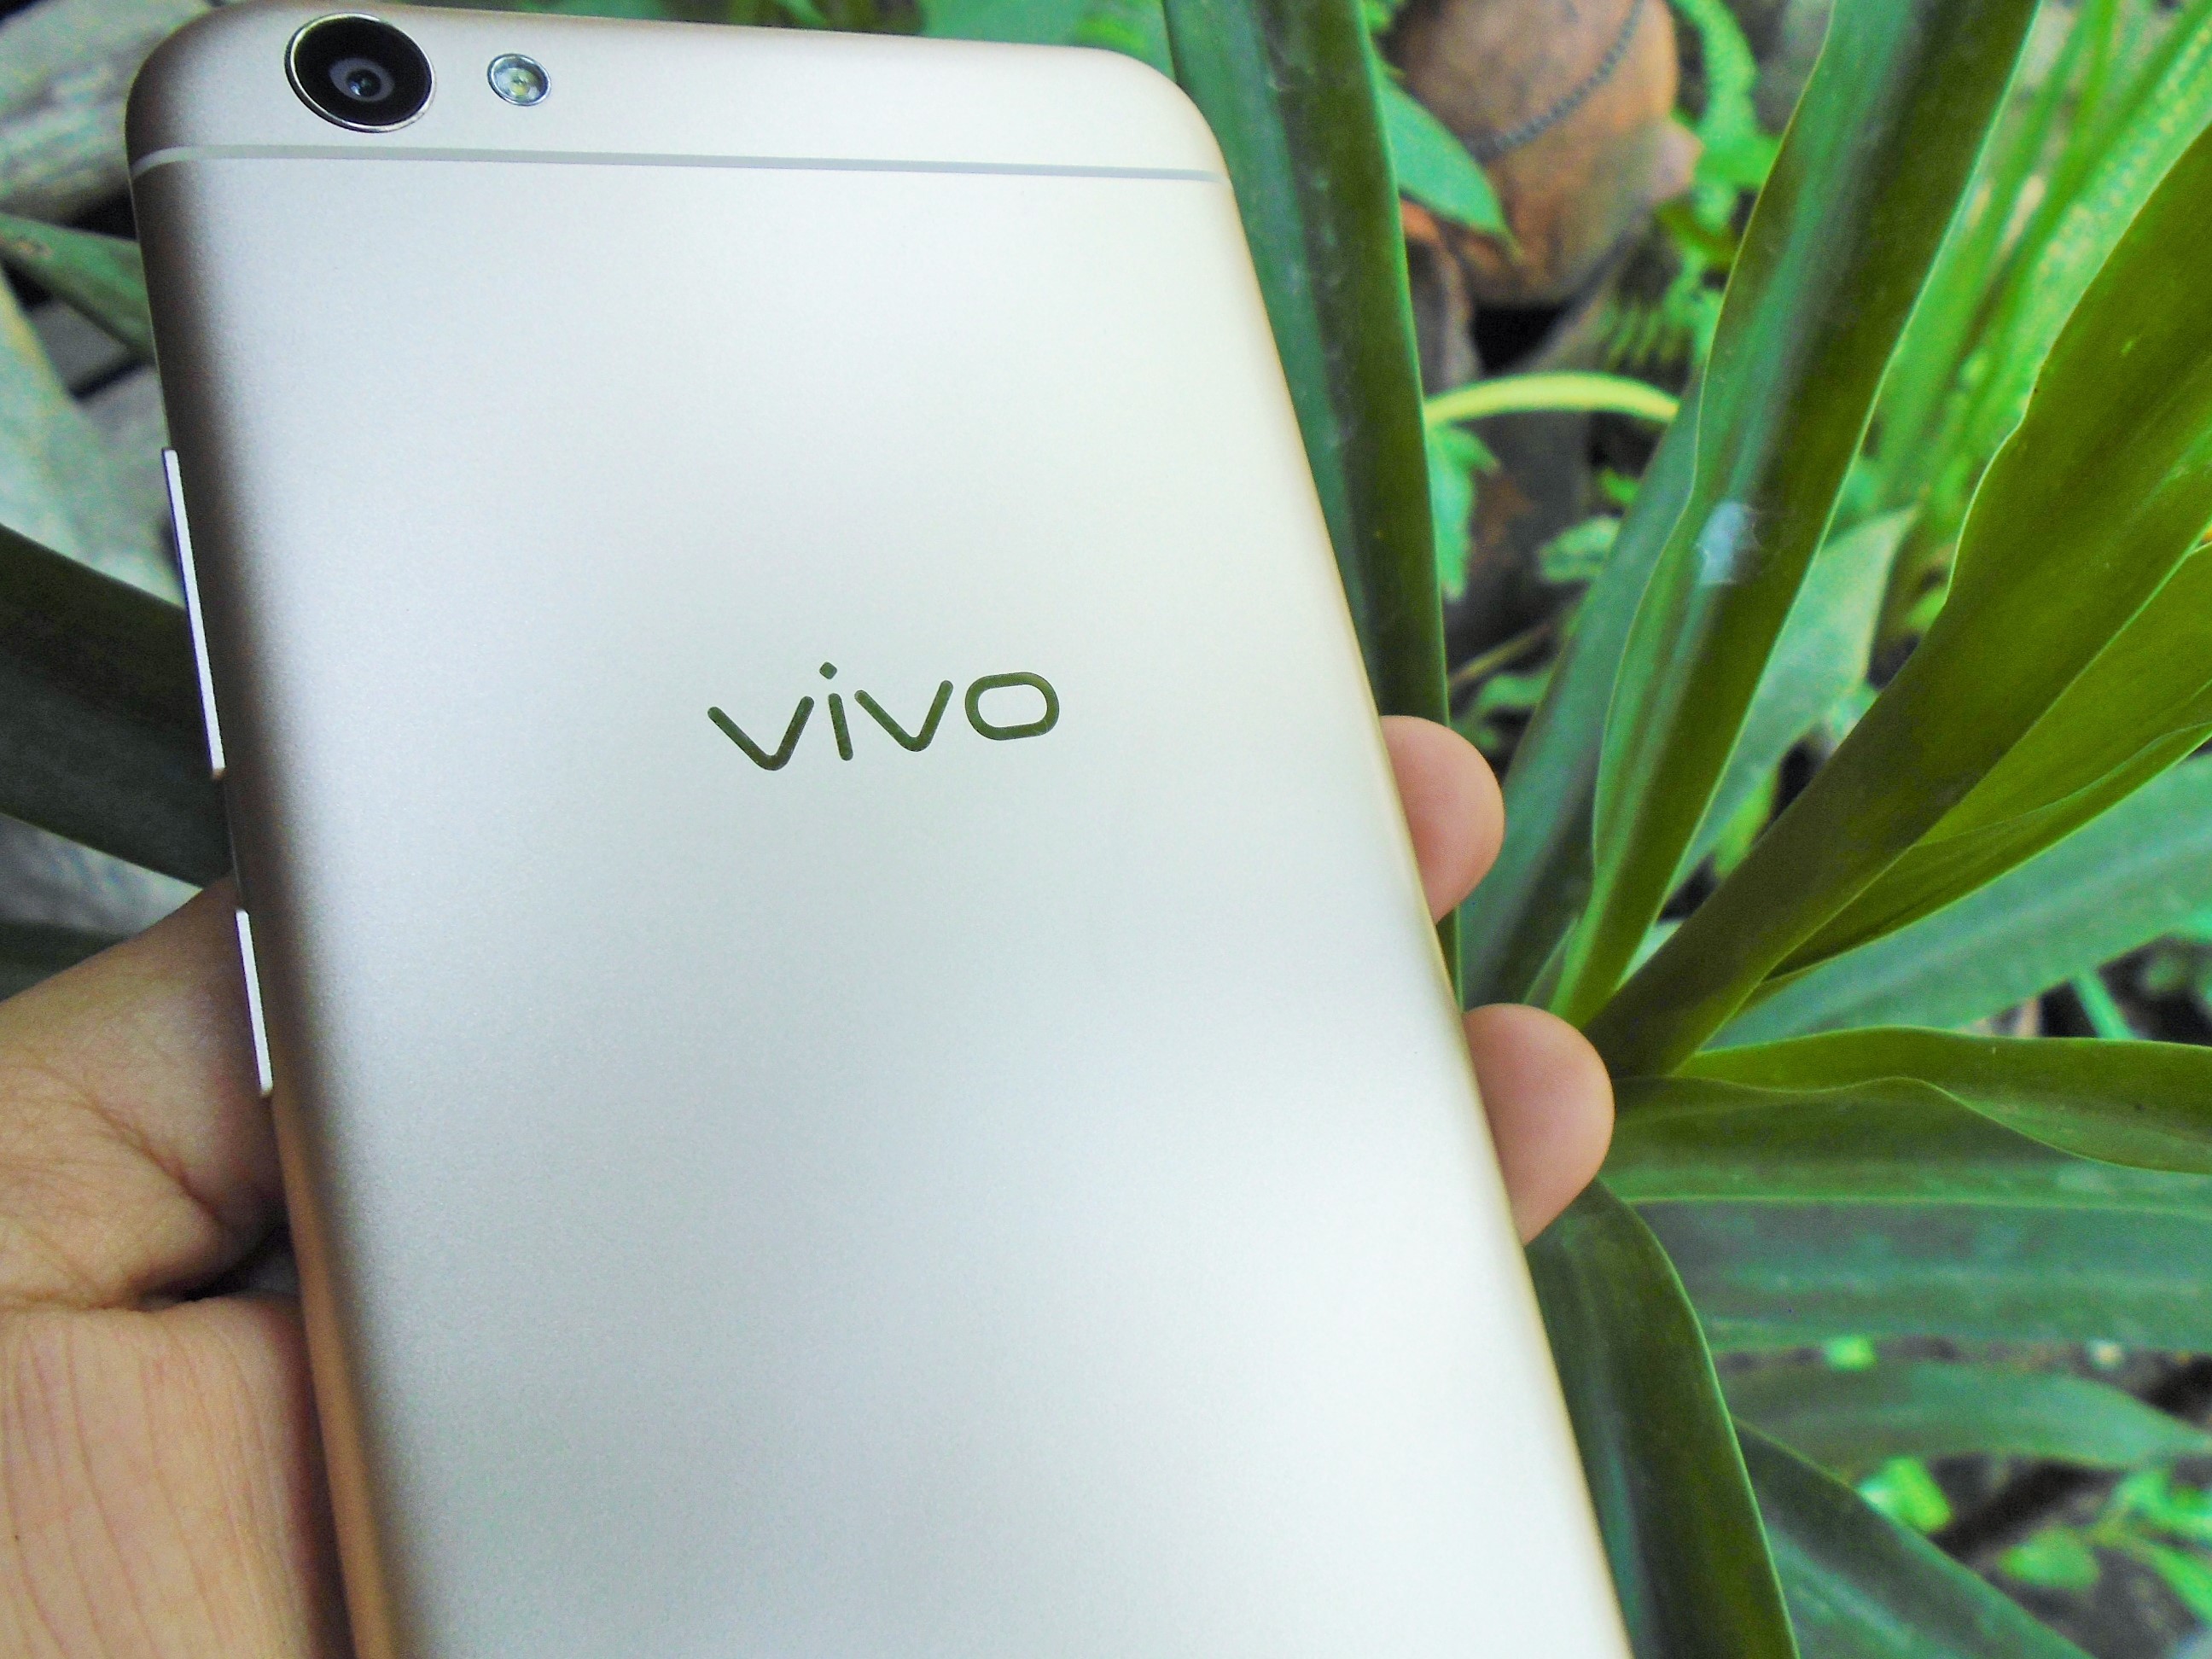 Vivo strengthens top position in the mobile phone industry with a 4 billion dollar partnership with Qualcomm